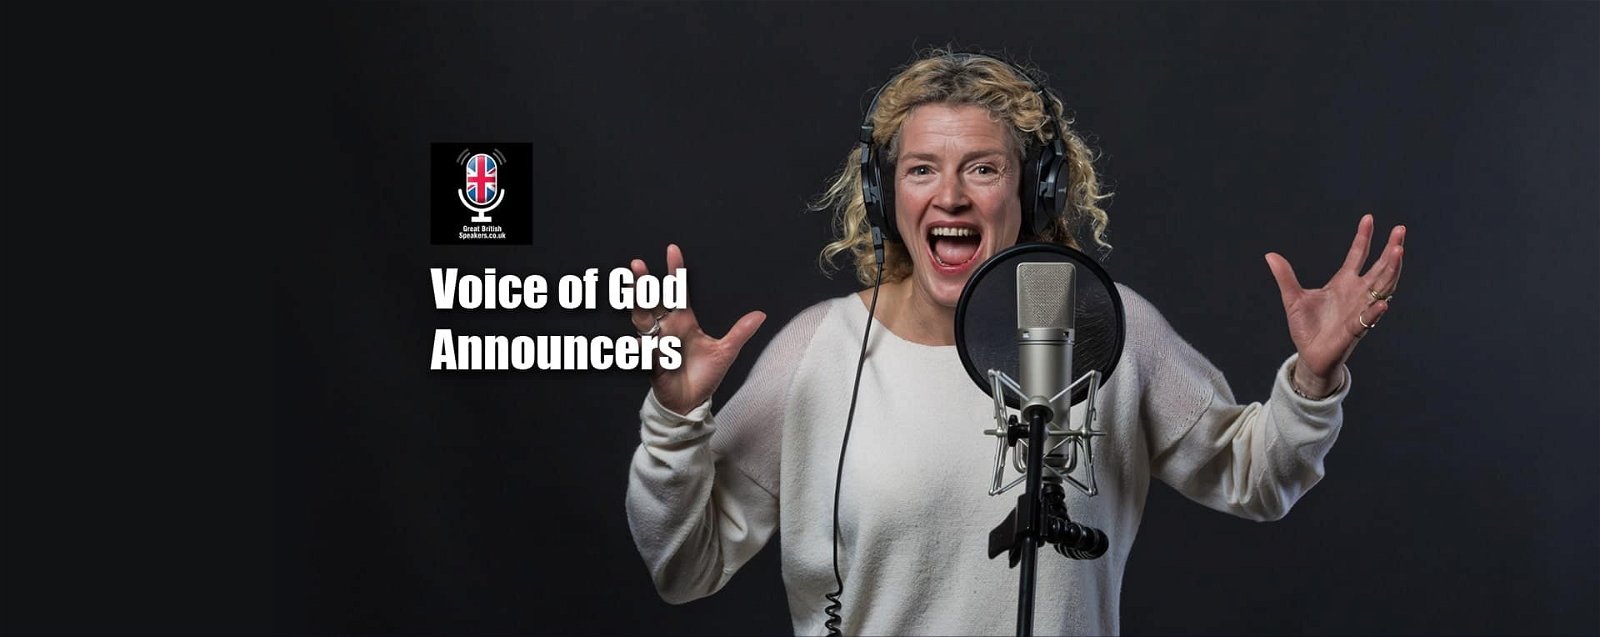 Voice of God Announcers Slider Great British Speakers-min